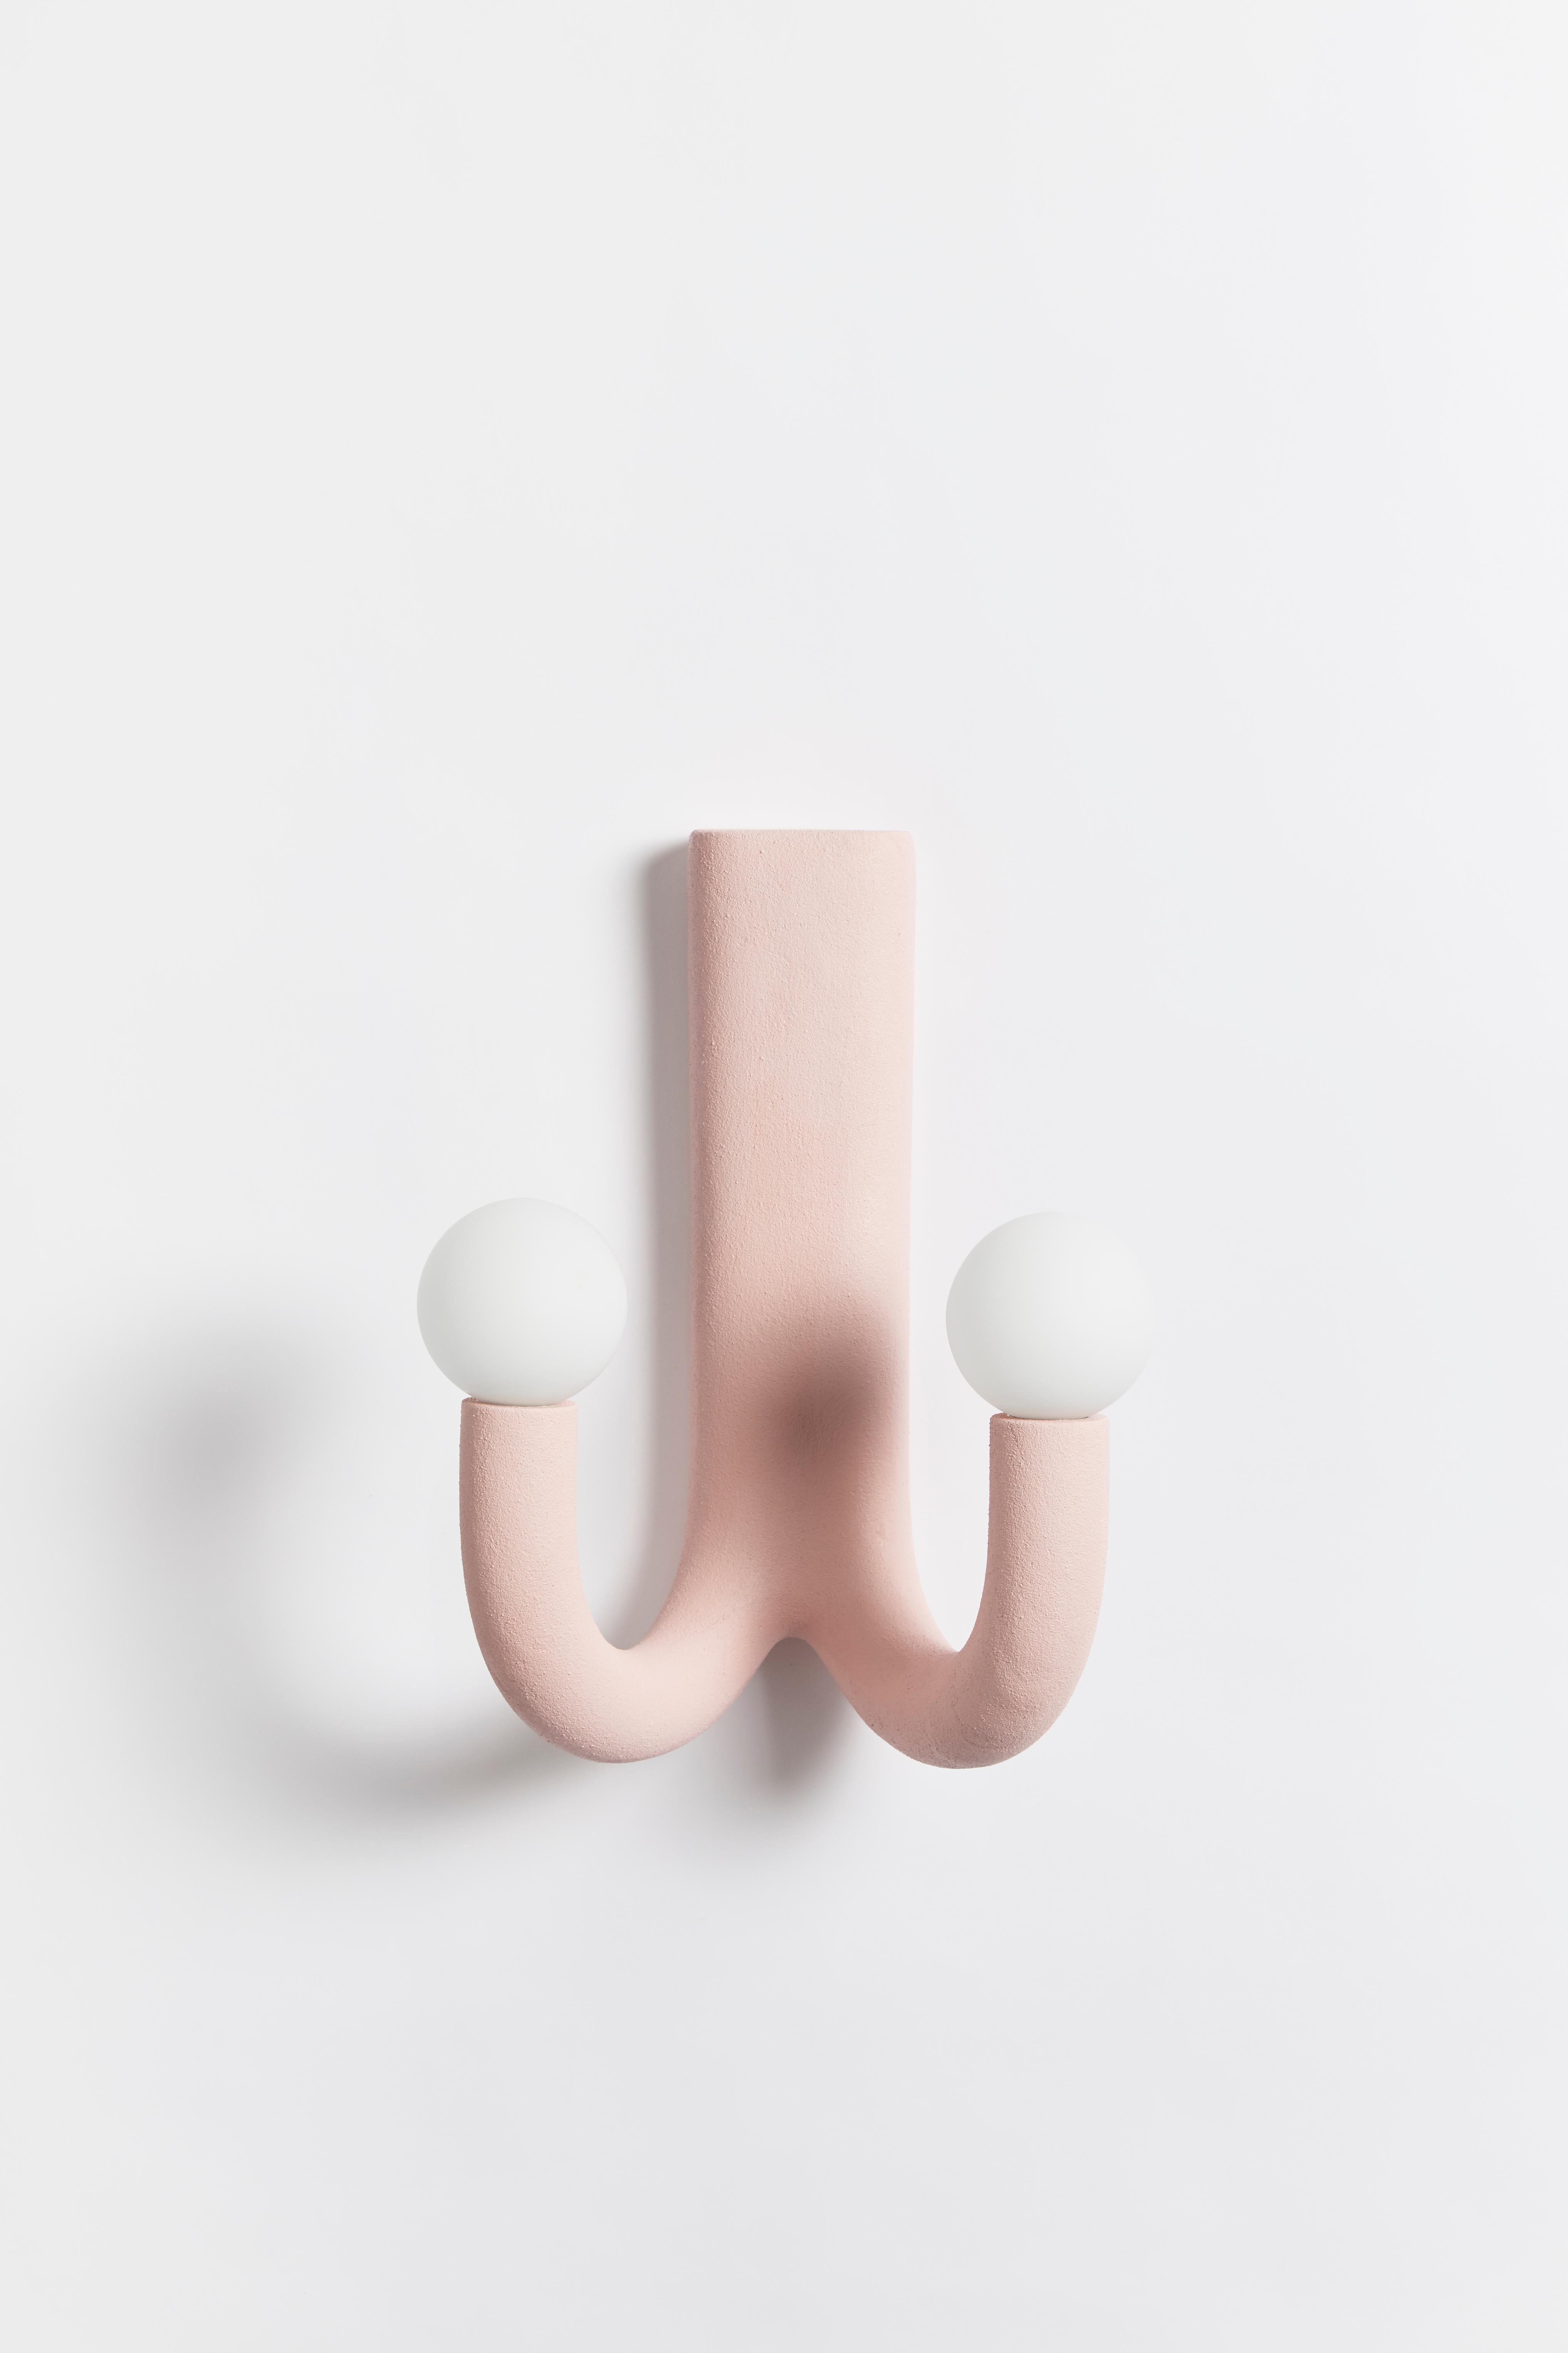 Hotel light 08 wall lamp by HWE
Limited Edition
Materials: Waste SLS 3D nylon powder, sand from sustainable sources
Dimensions:  H 39 x W 22 x L 32 cm
Colour: pink
Also available in: aqua, cream, lemon, anthracite and grey

All our lamps can be